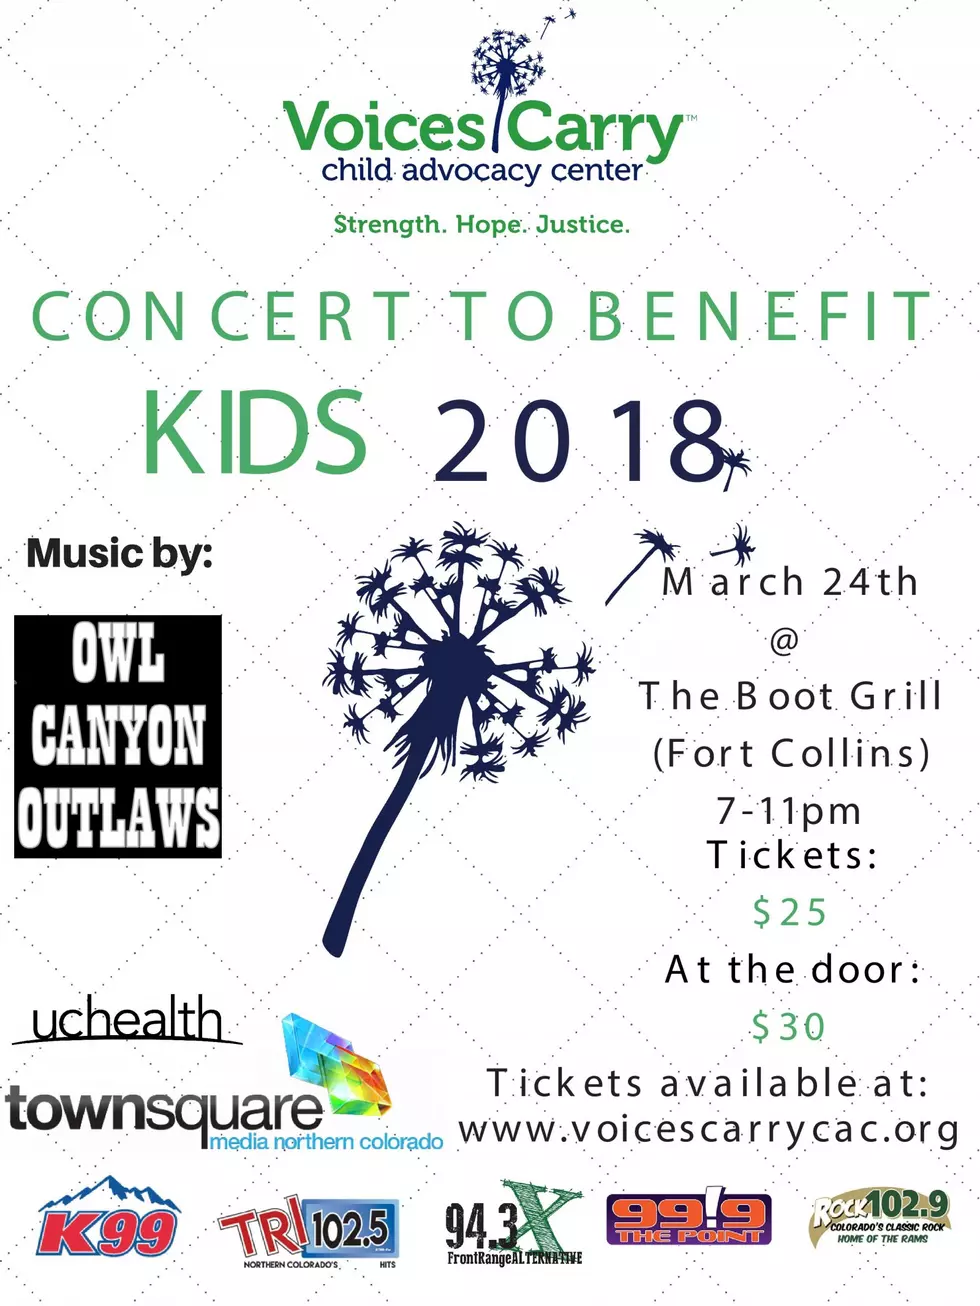 *Update&#8211; Event Cancelled&#8211;Voices Carry Child Advocacy Center Presents A Concert to Benefit Kids